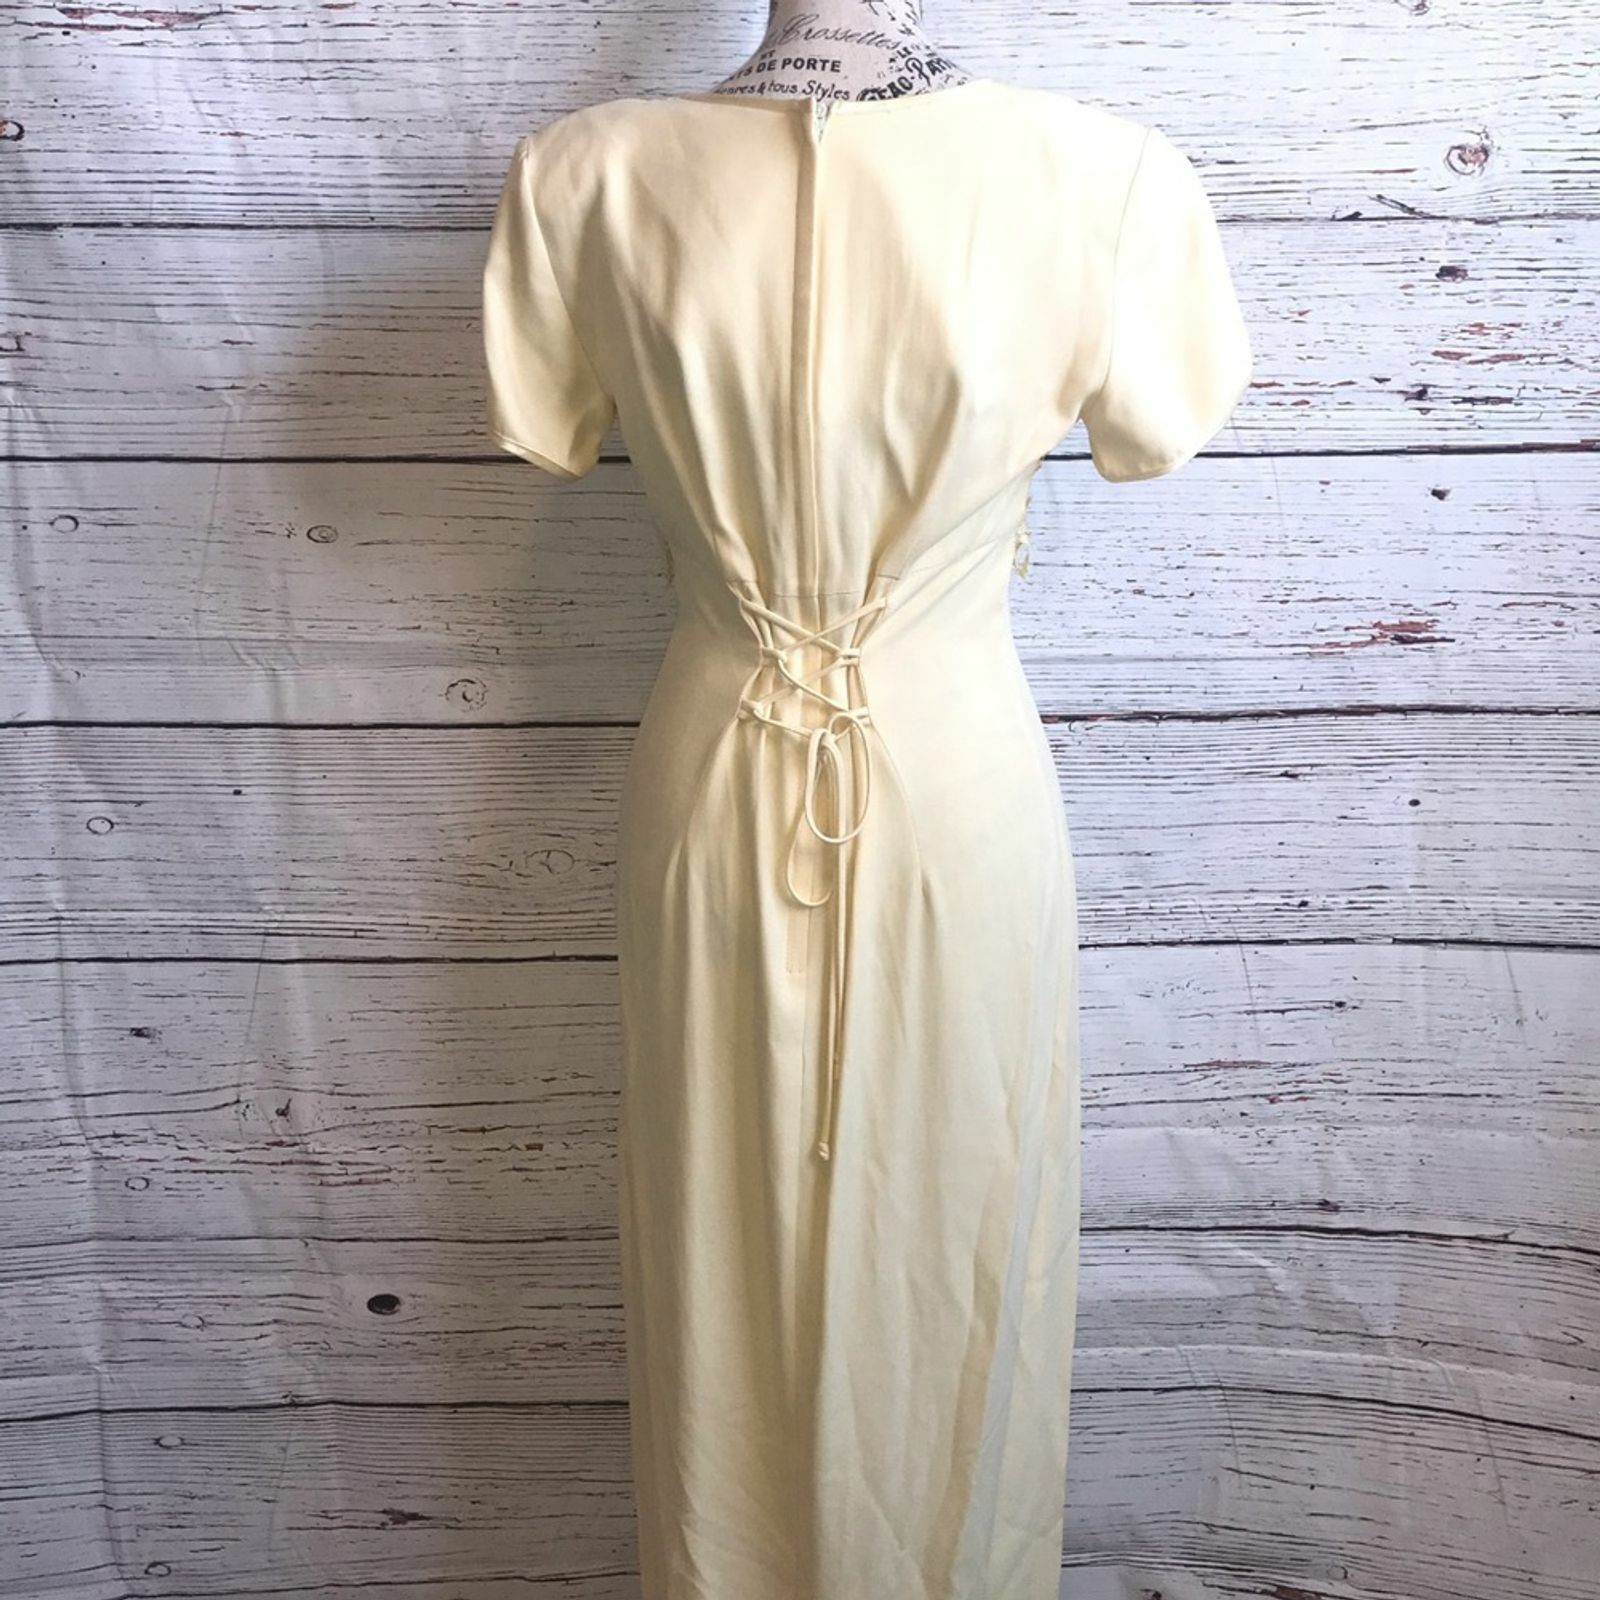 Vintage Be Smart yellow dress with lace - image 9